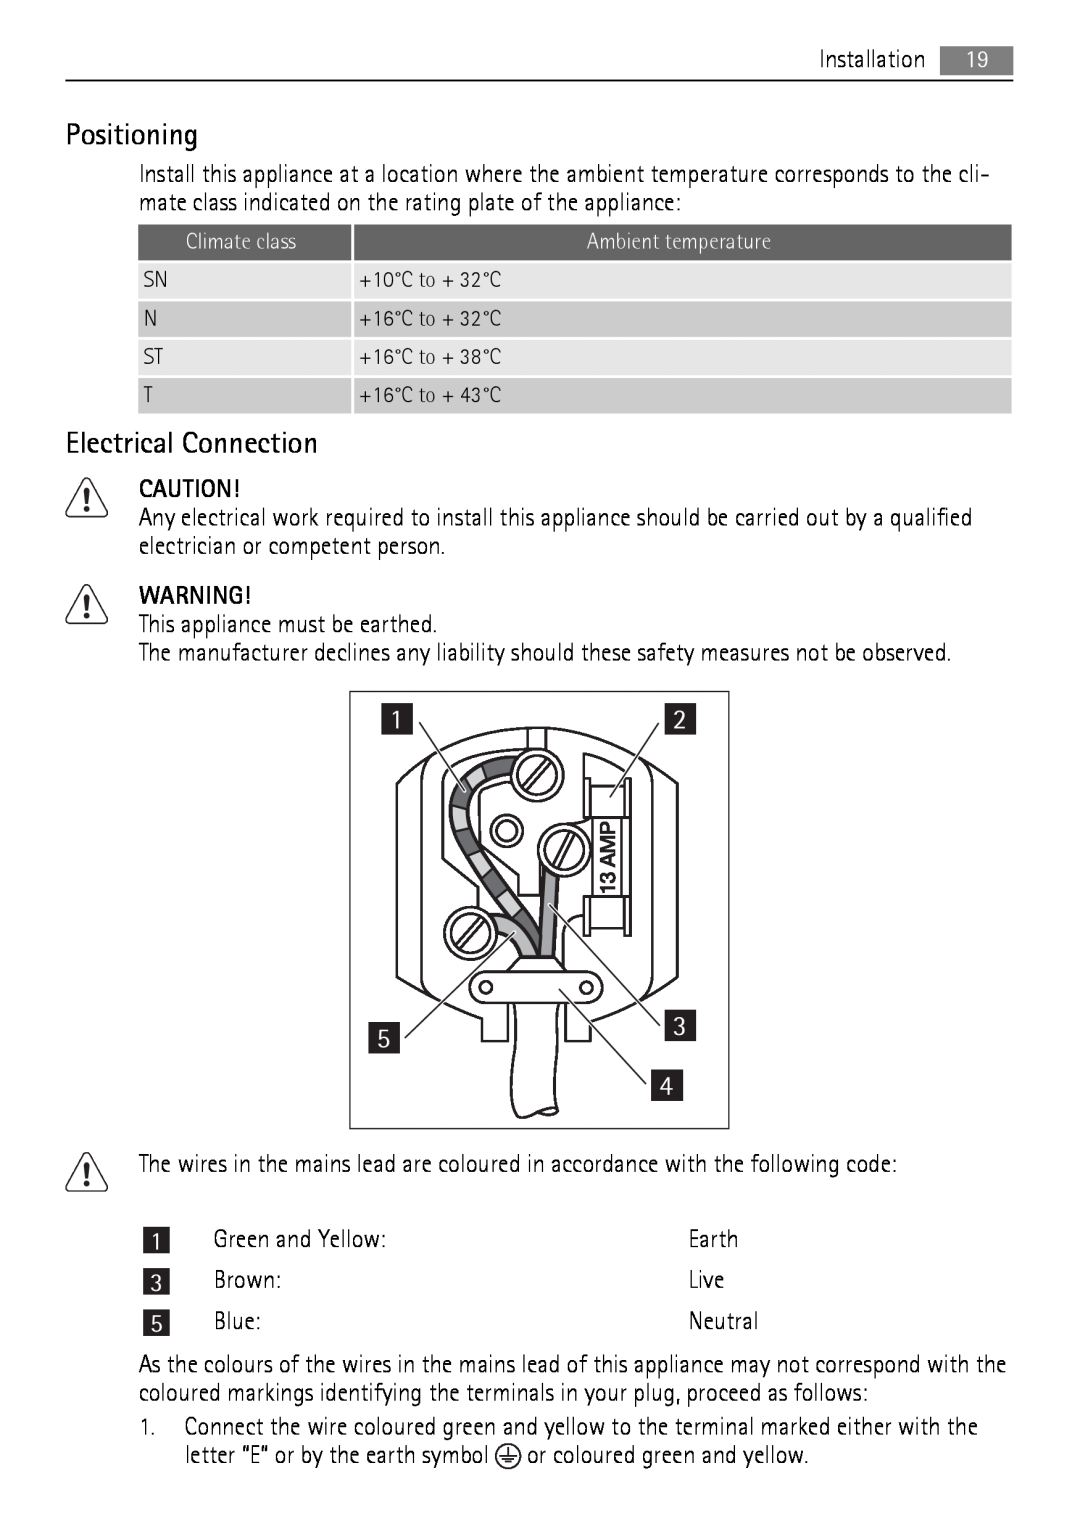 AEG SCN71800S0 Positioning, Electrical Connection, Installation, This appliance must be earthed, Green and Yellow, Earth 